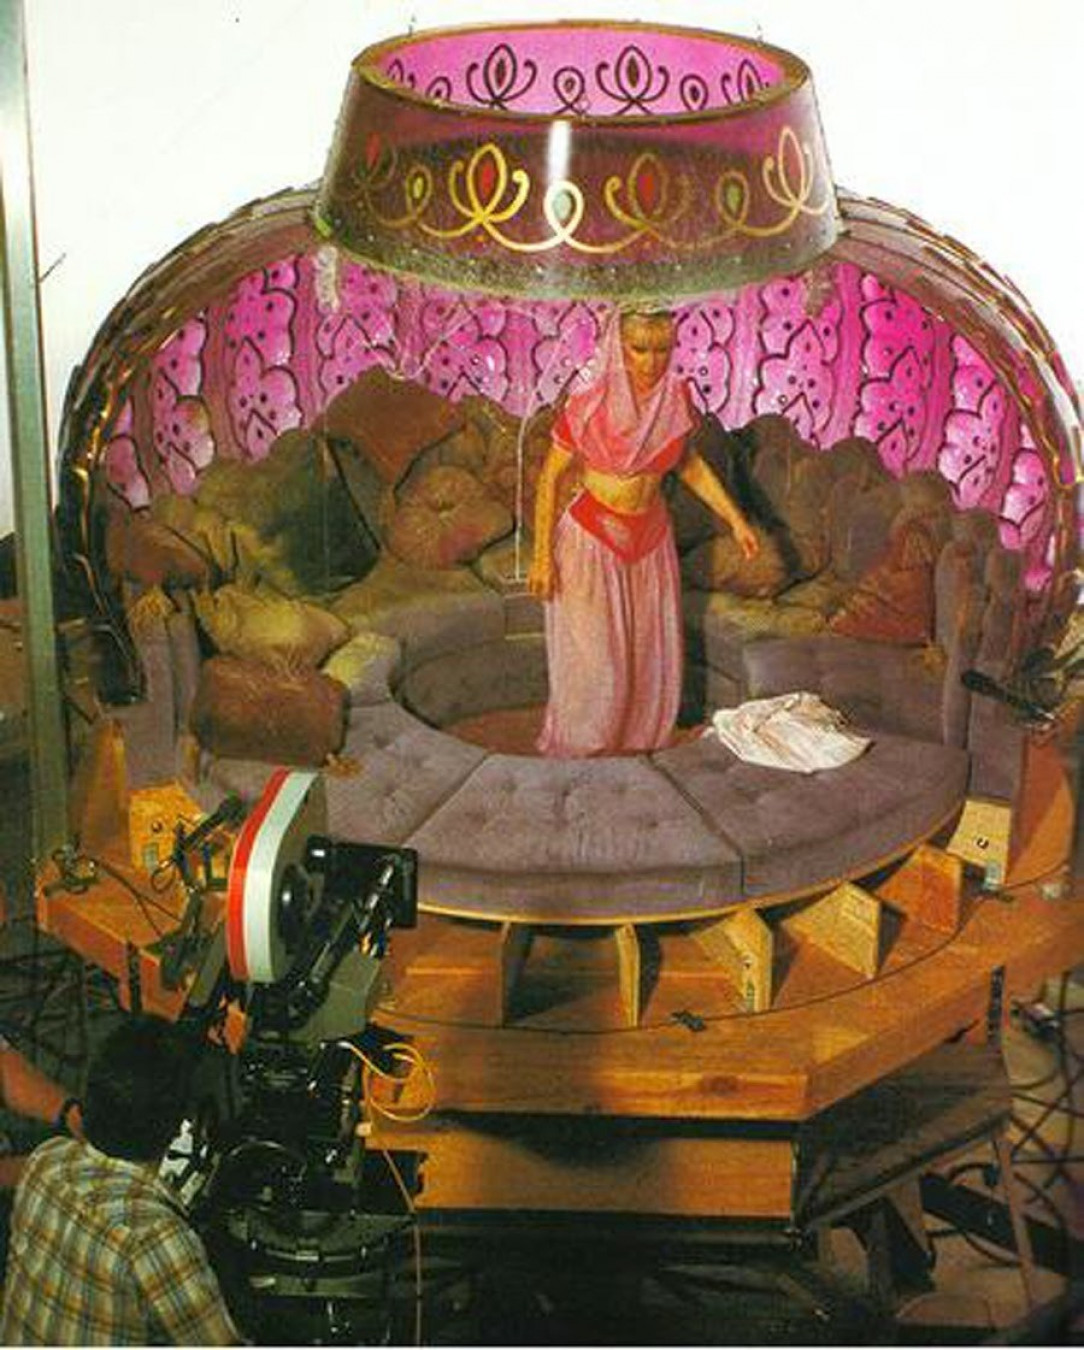 Barbara Eden Filming On the &quot;I Dream of Jeannie&quot; Bottle Set, 1960s